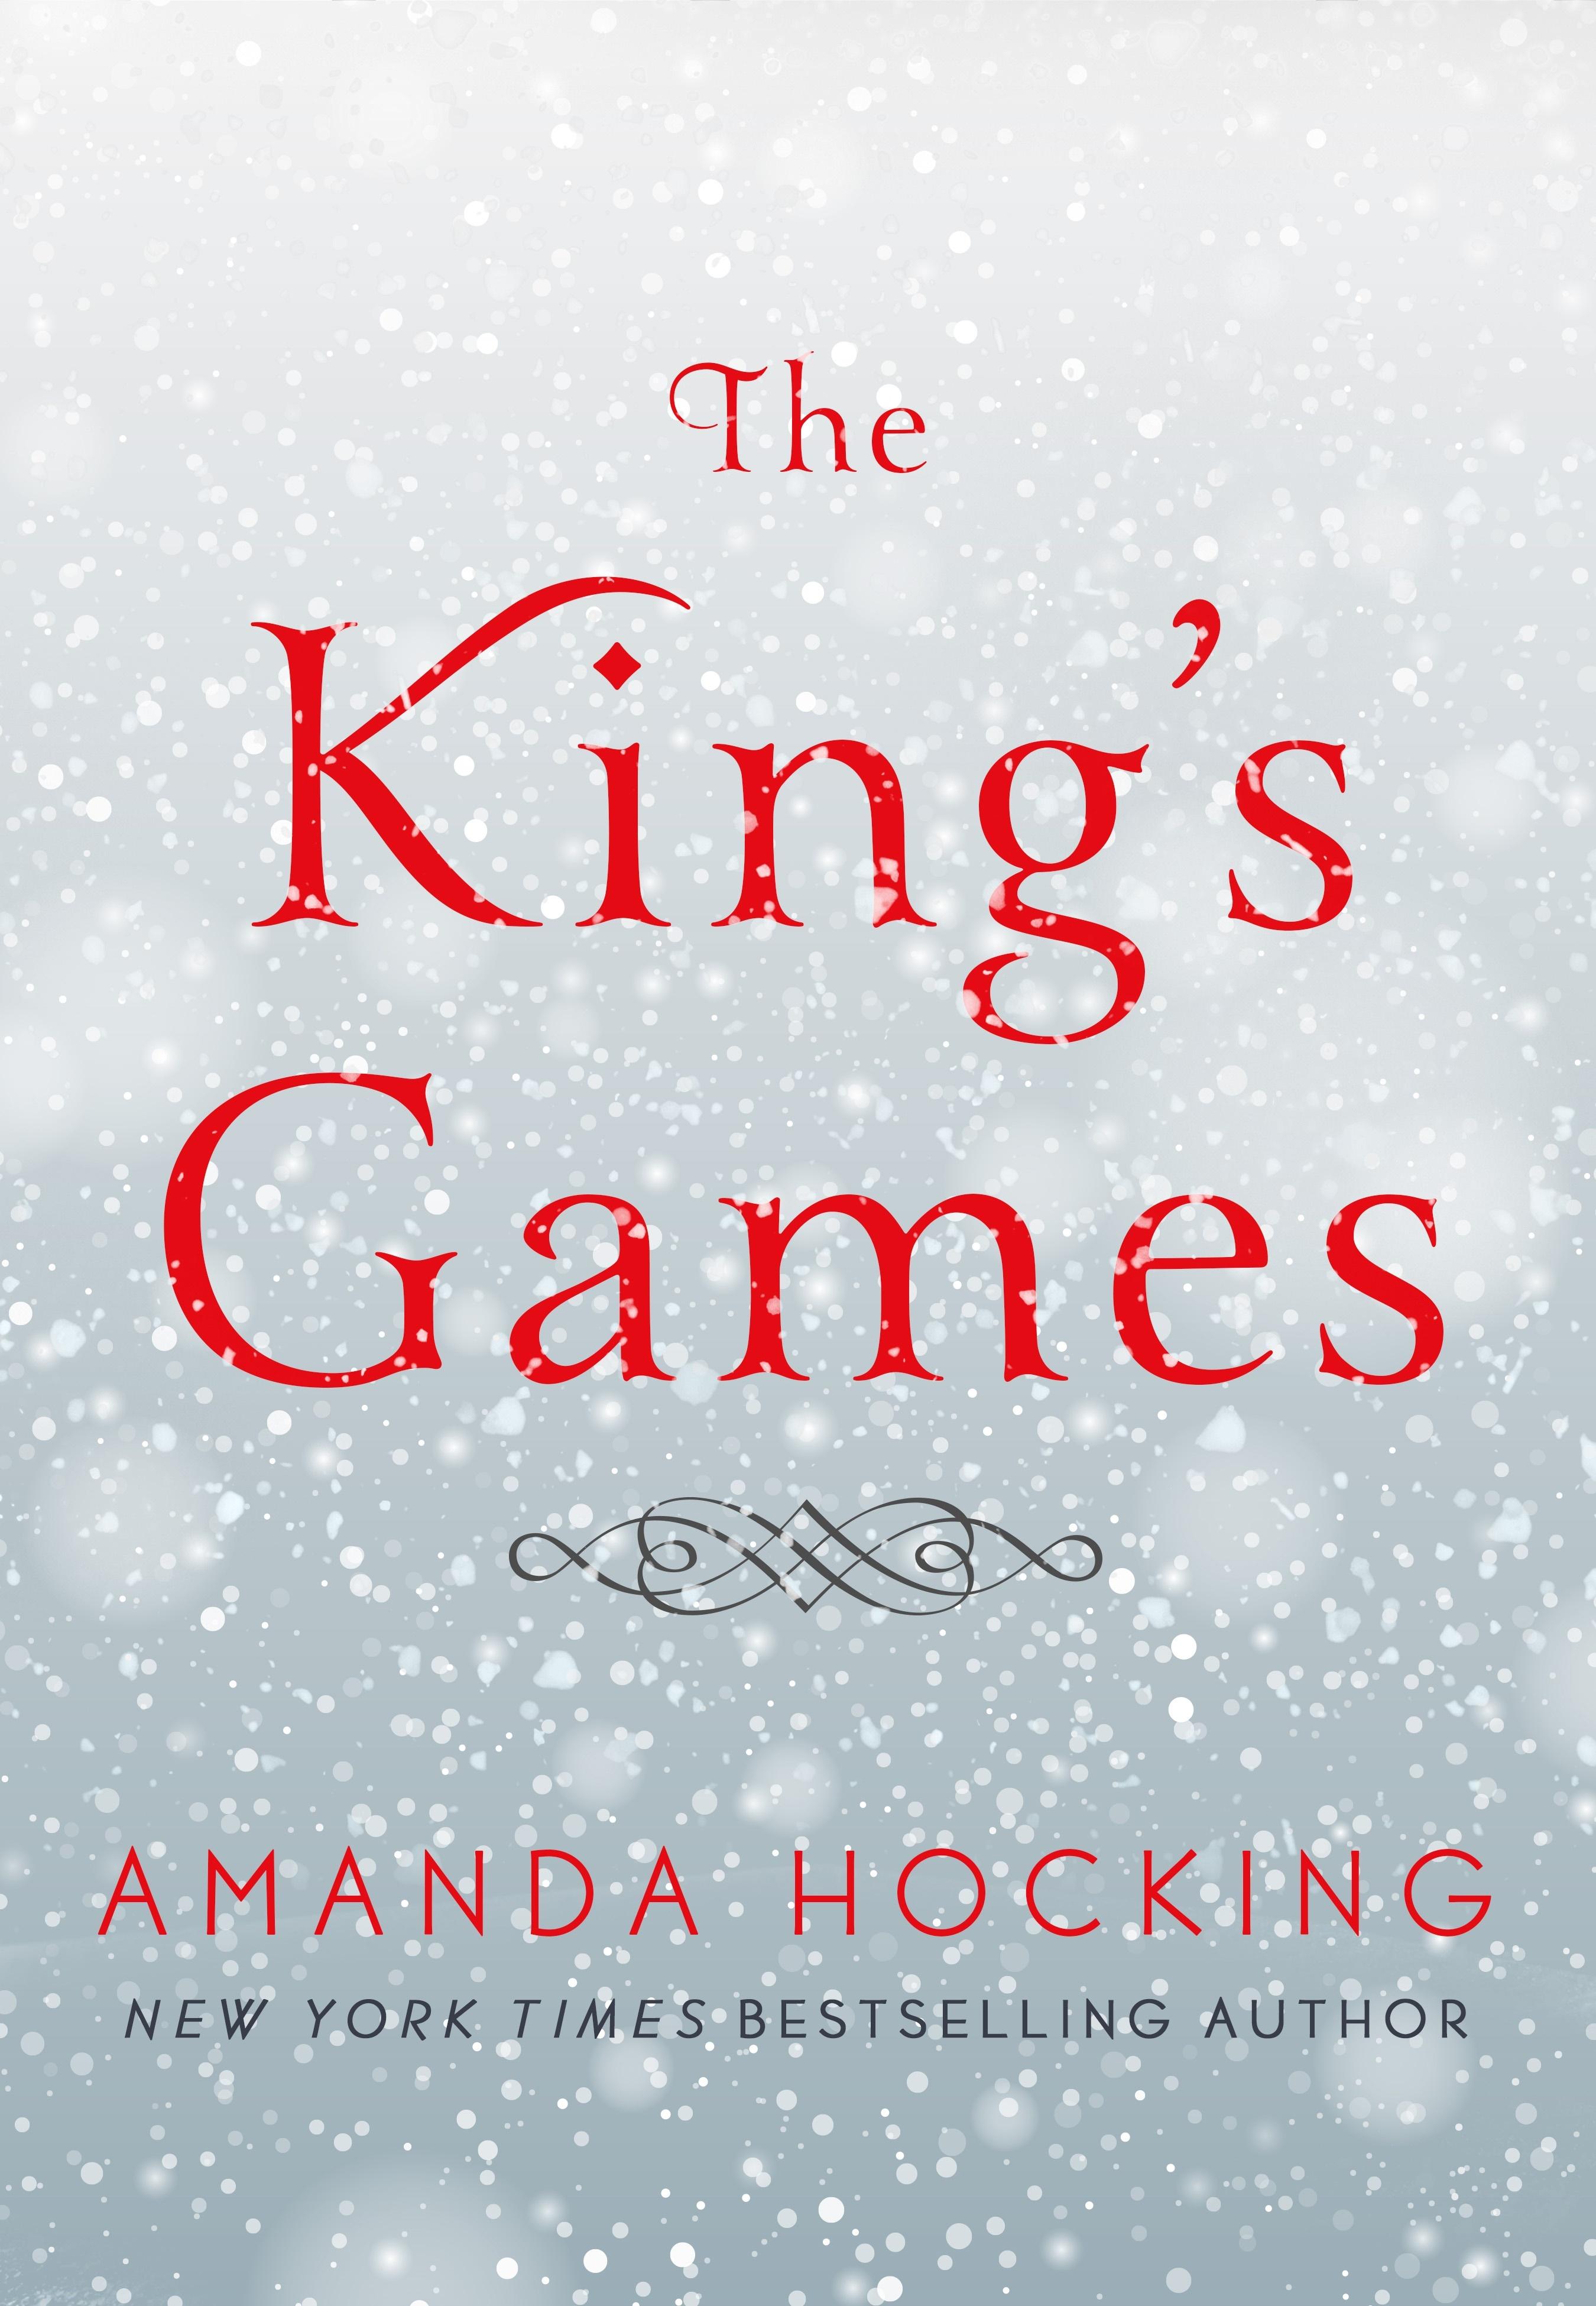 The King's Games